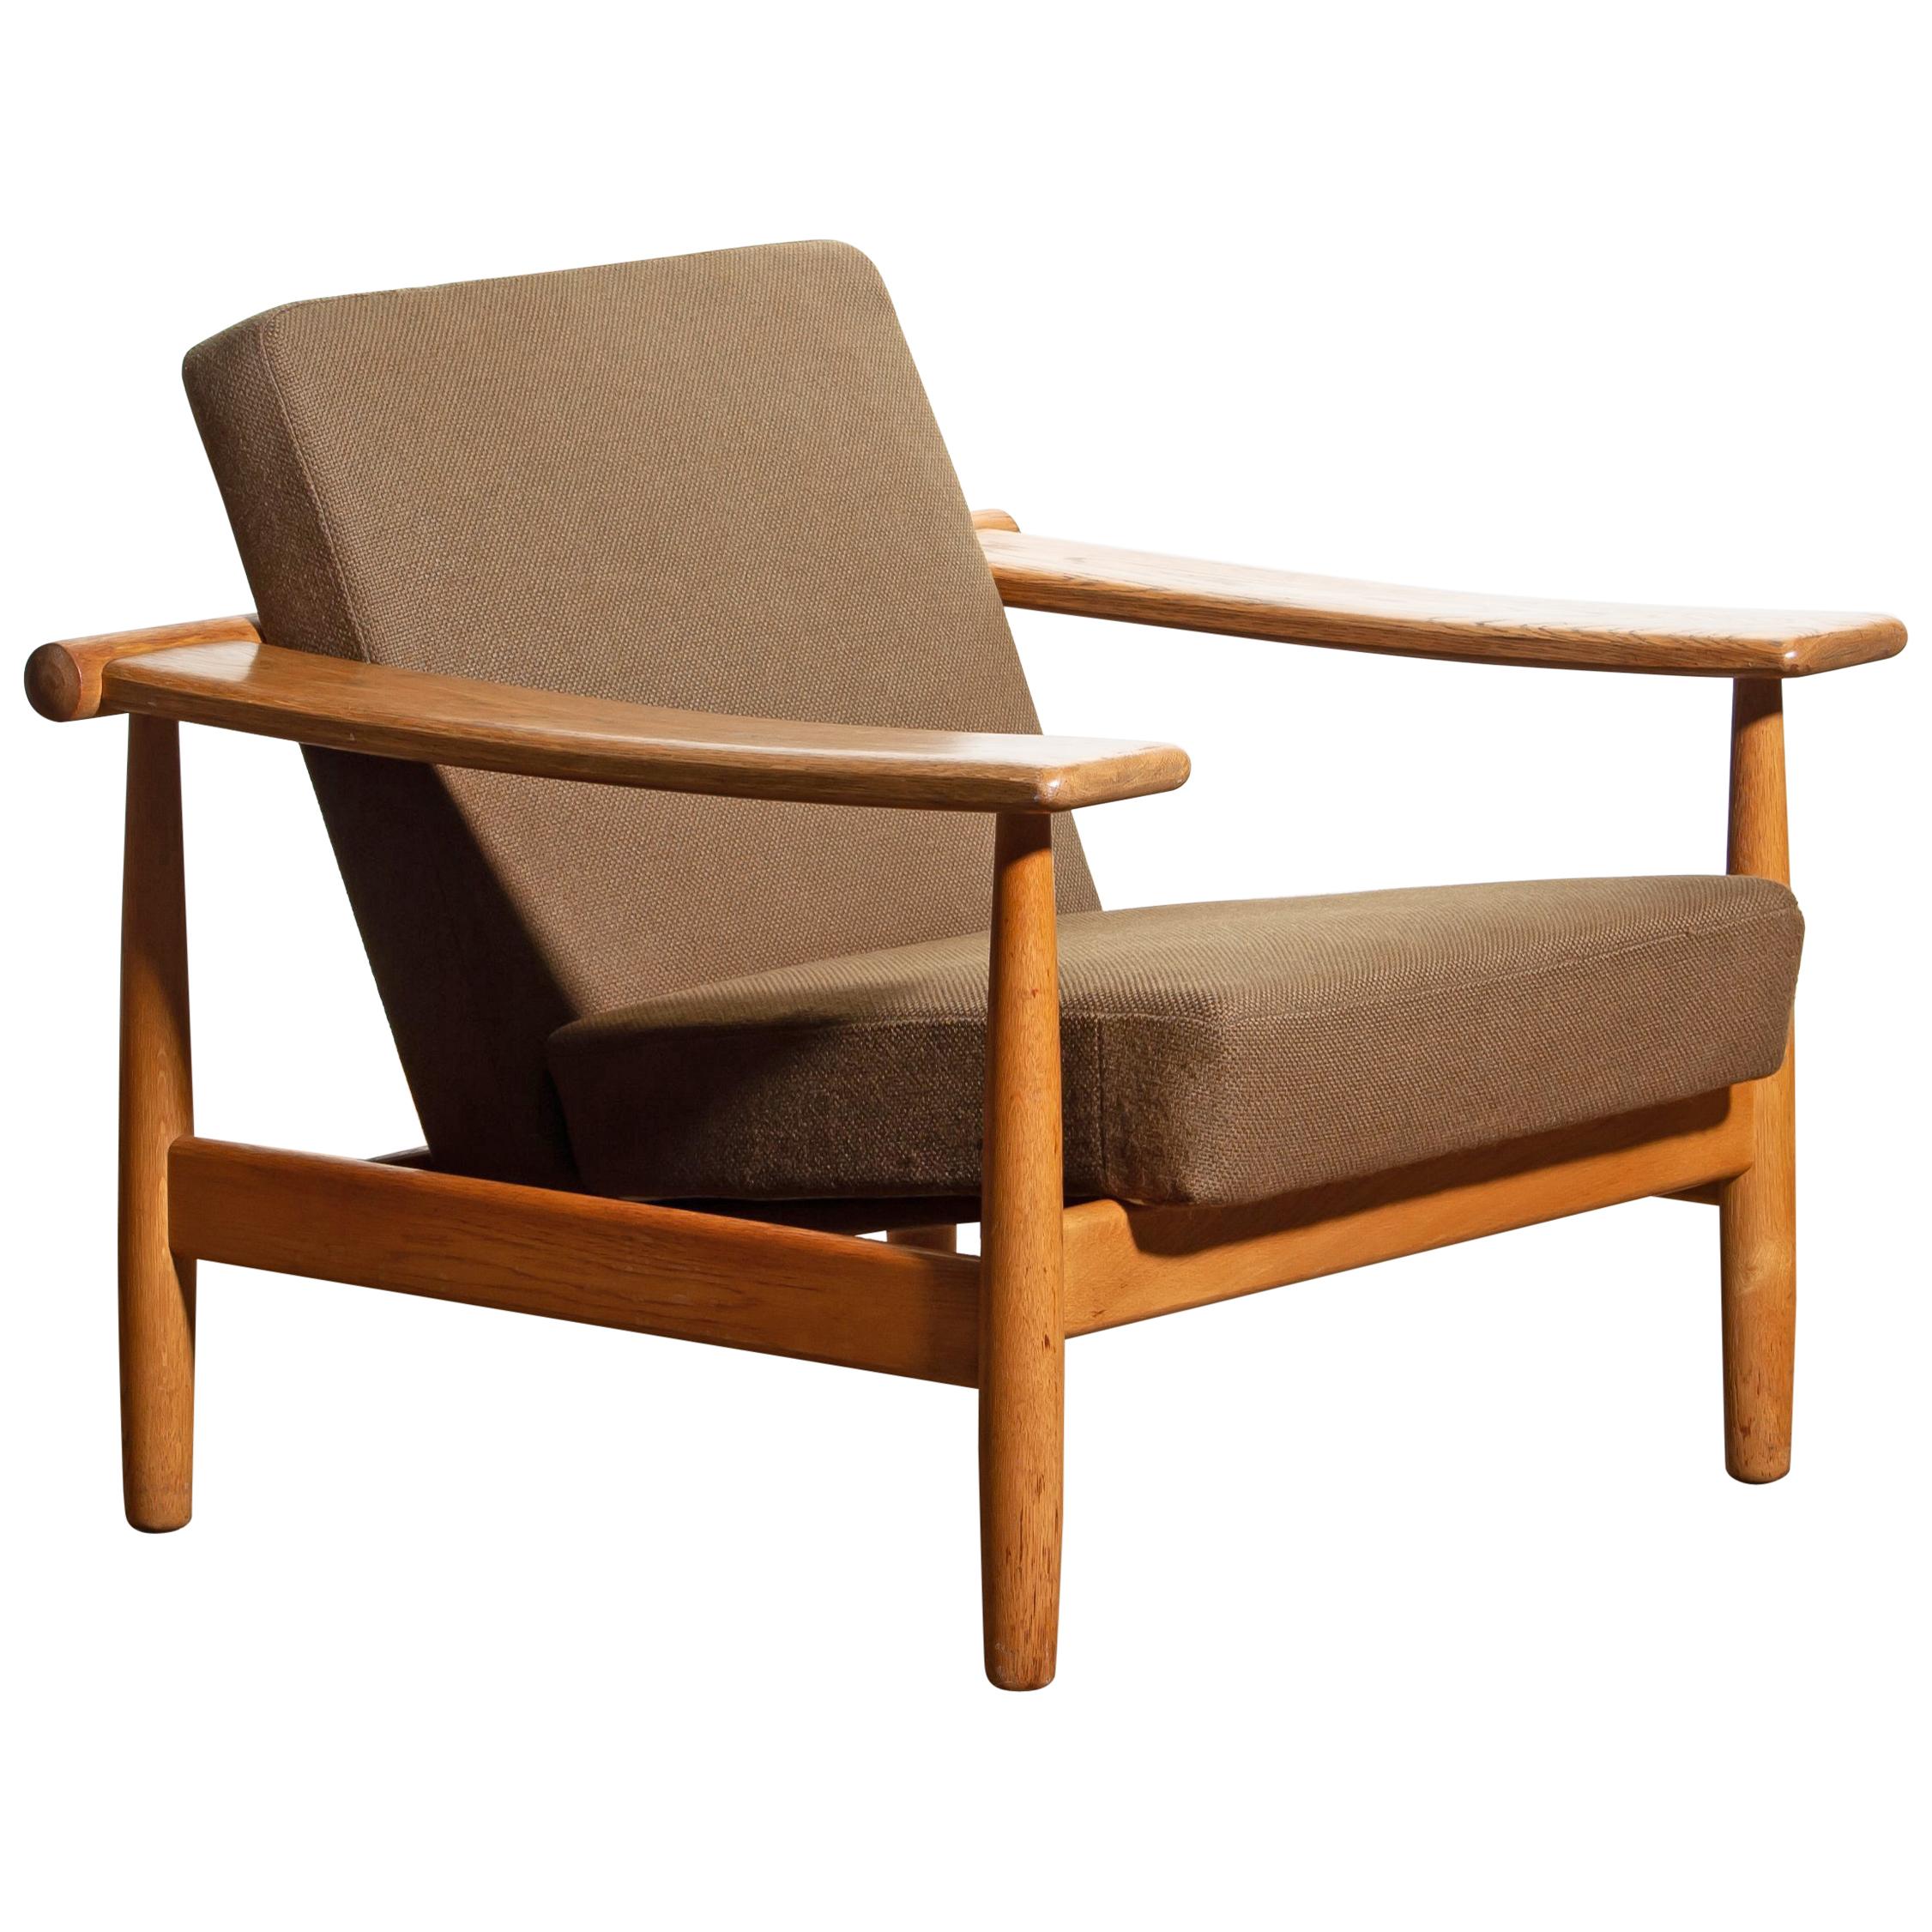 Beautiful oak lounge chair from the 1960s made in Denmark.
The oak frame is in good condition. 
The fabric is in fair condition like the pictures shows.



 